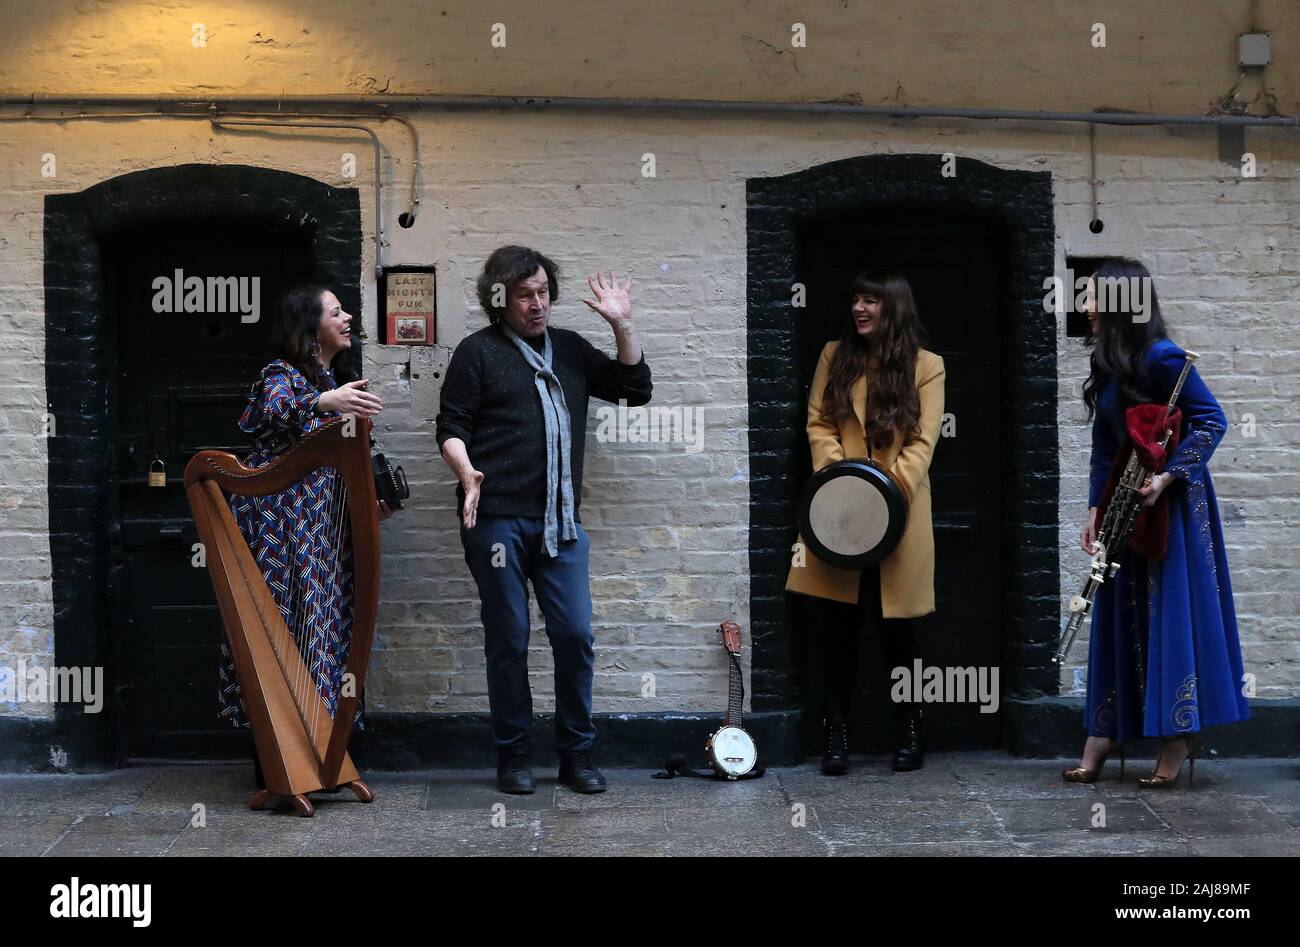 At the launch of the Programme for TradFest 2020 is actor Stephen Rea (second left) with musicians (from left) Michelle Mulcahy, Aoife Scott and Louise Mulcahy at Kilmainham Gaol in Dublin. The Gaol will this year join the list of historic venues hosting events during the festival which runs from 22 - 26 of January. Stock Photo